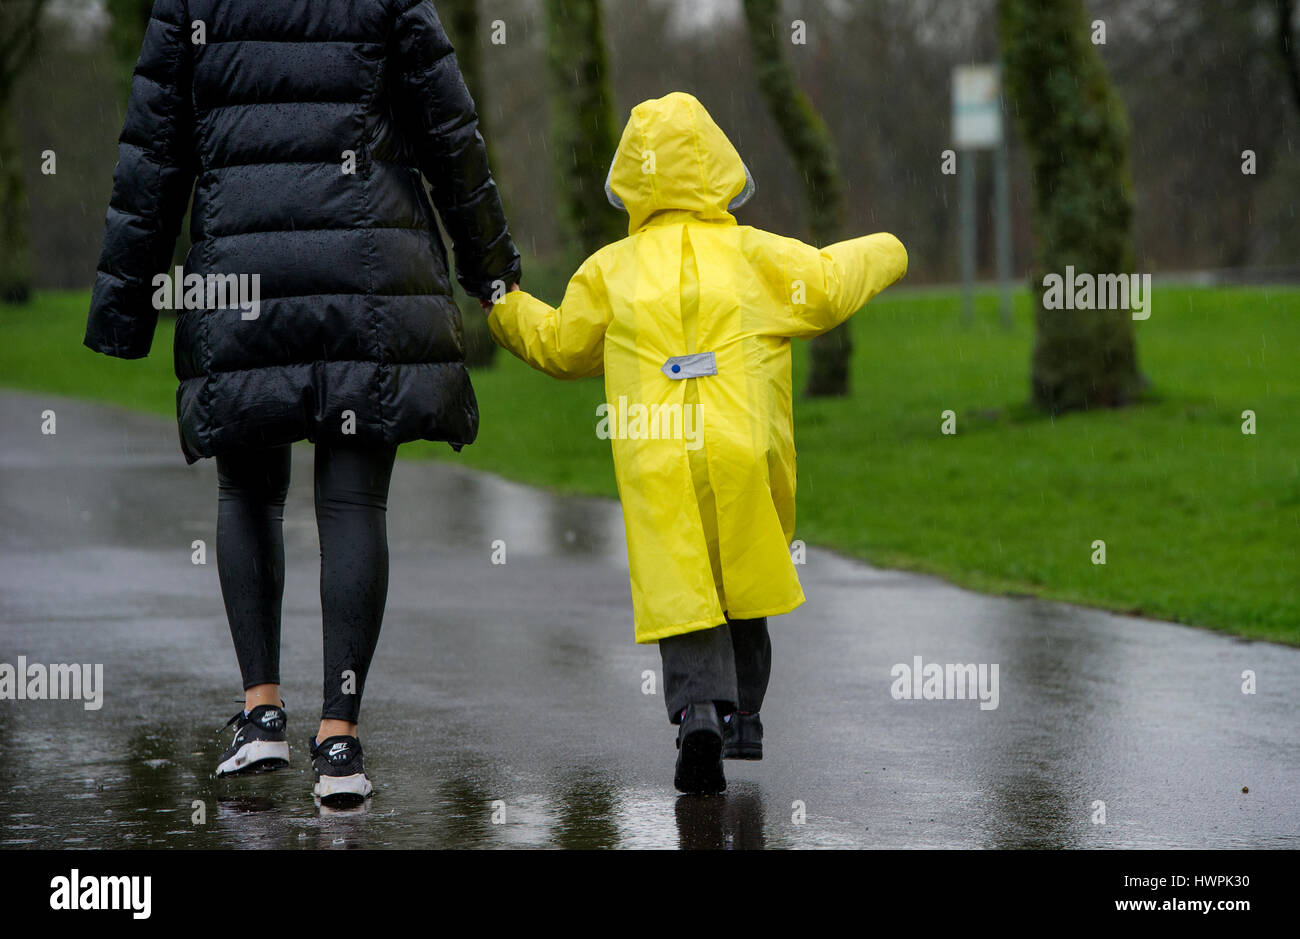 Bolton, UK. 22nd Mar, 2017. A wet walk to school through Leverhulme Park in Bolton, Lancashire, as torrential rain hampers the morning commute. Picture by Paul Heyes, Wednesday March 22, 2017. Credit: Paul Heyes/Alamy Live News Stock Photo